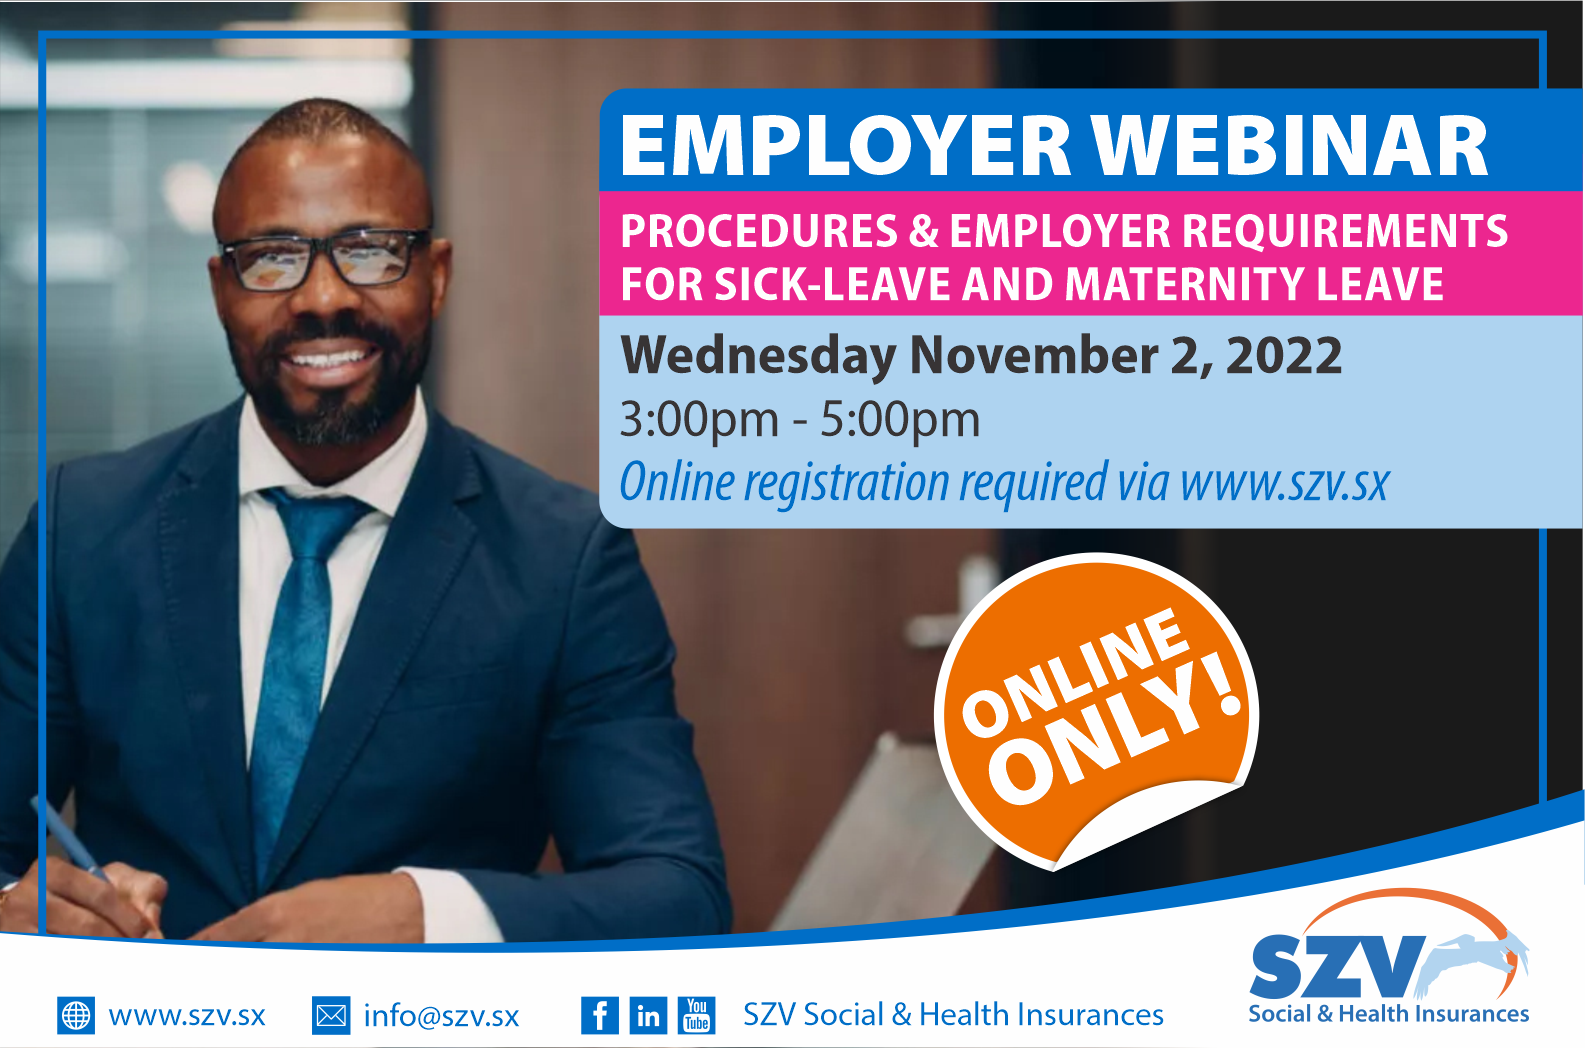 Online only: Employer Info Session - Procedures & requirements for Sick-Leave and Maternity Leave 